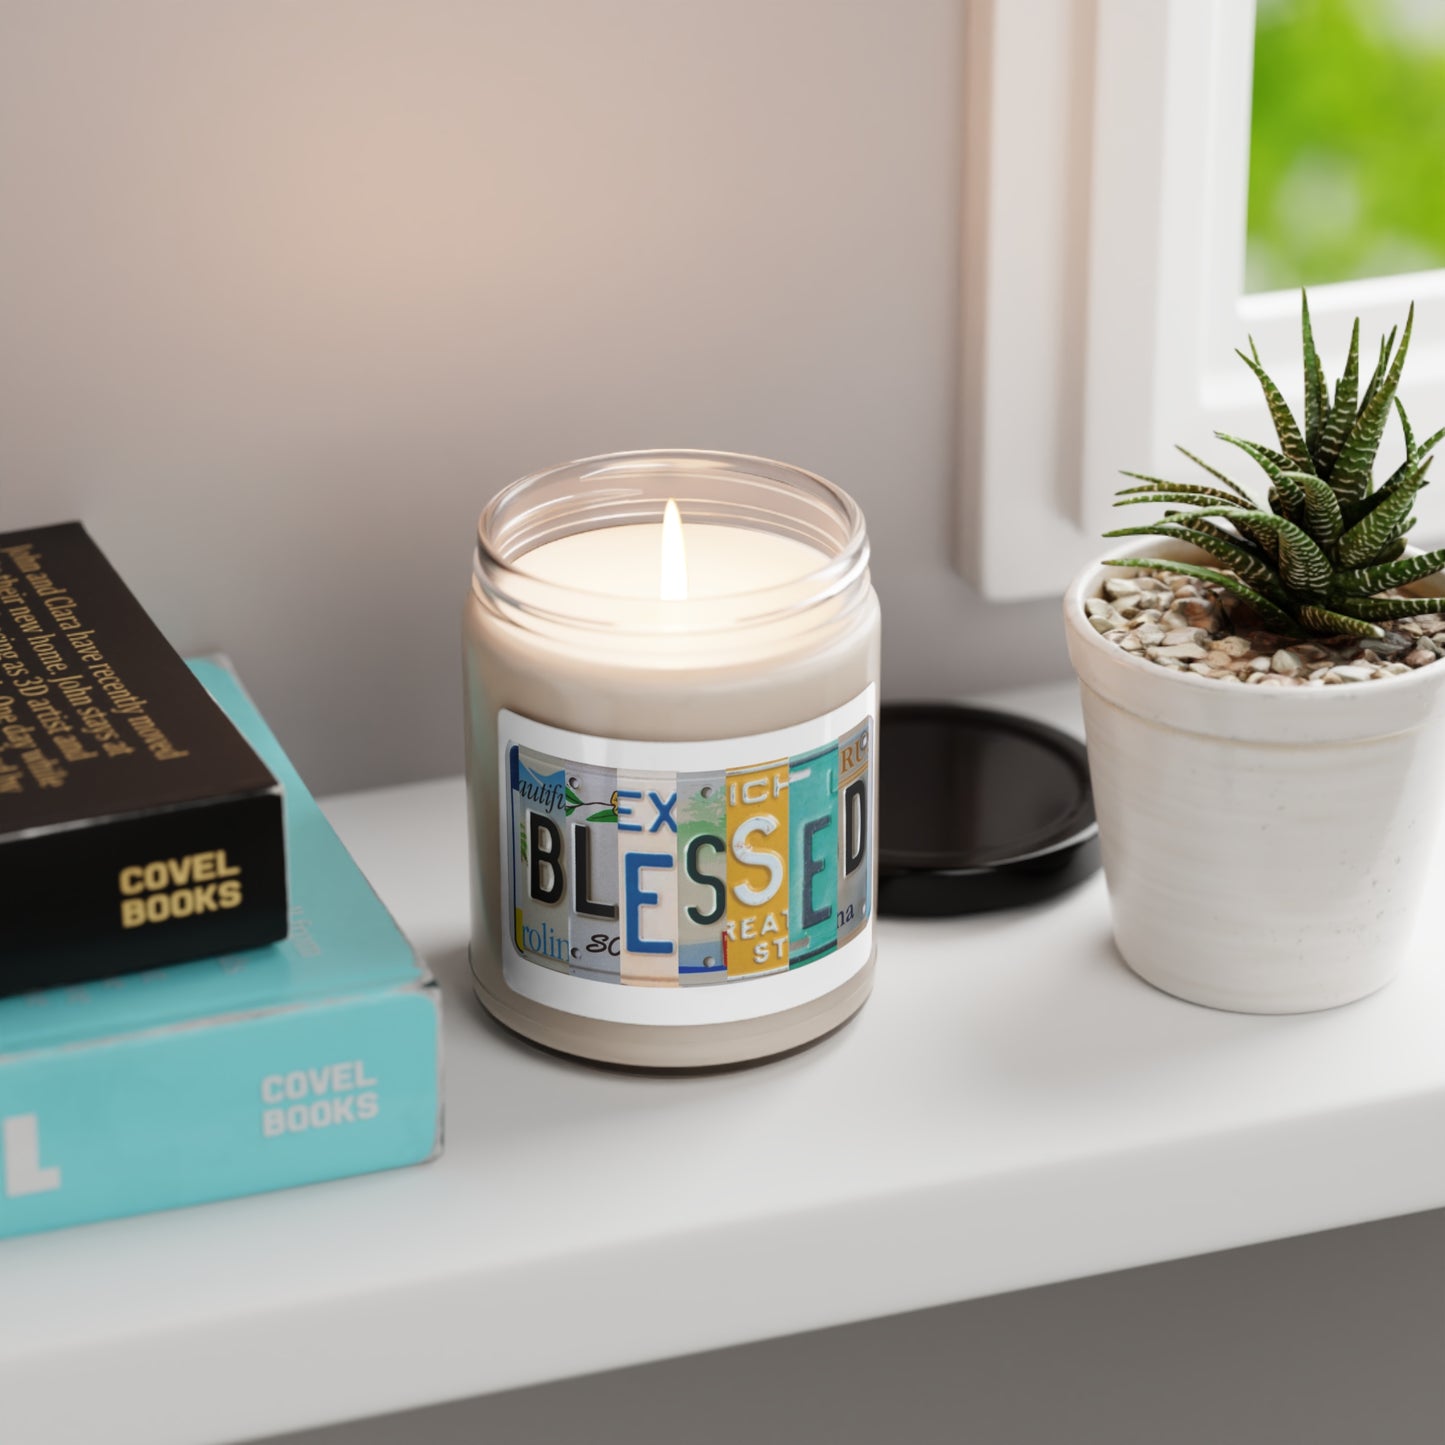 Inspirational 'Blessed' Scented Soy Candle, 9oz - Long-Lasting Fragrance